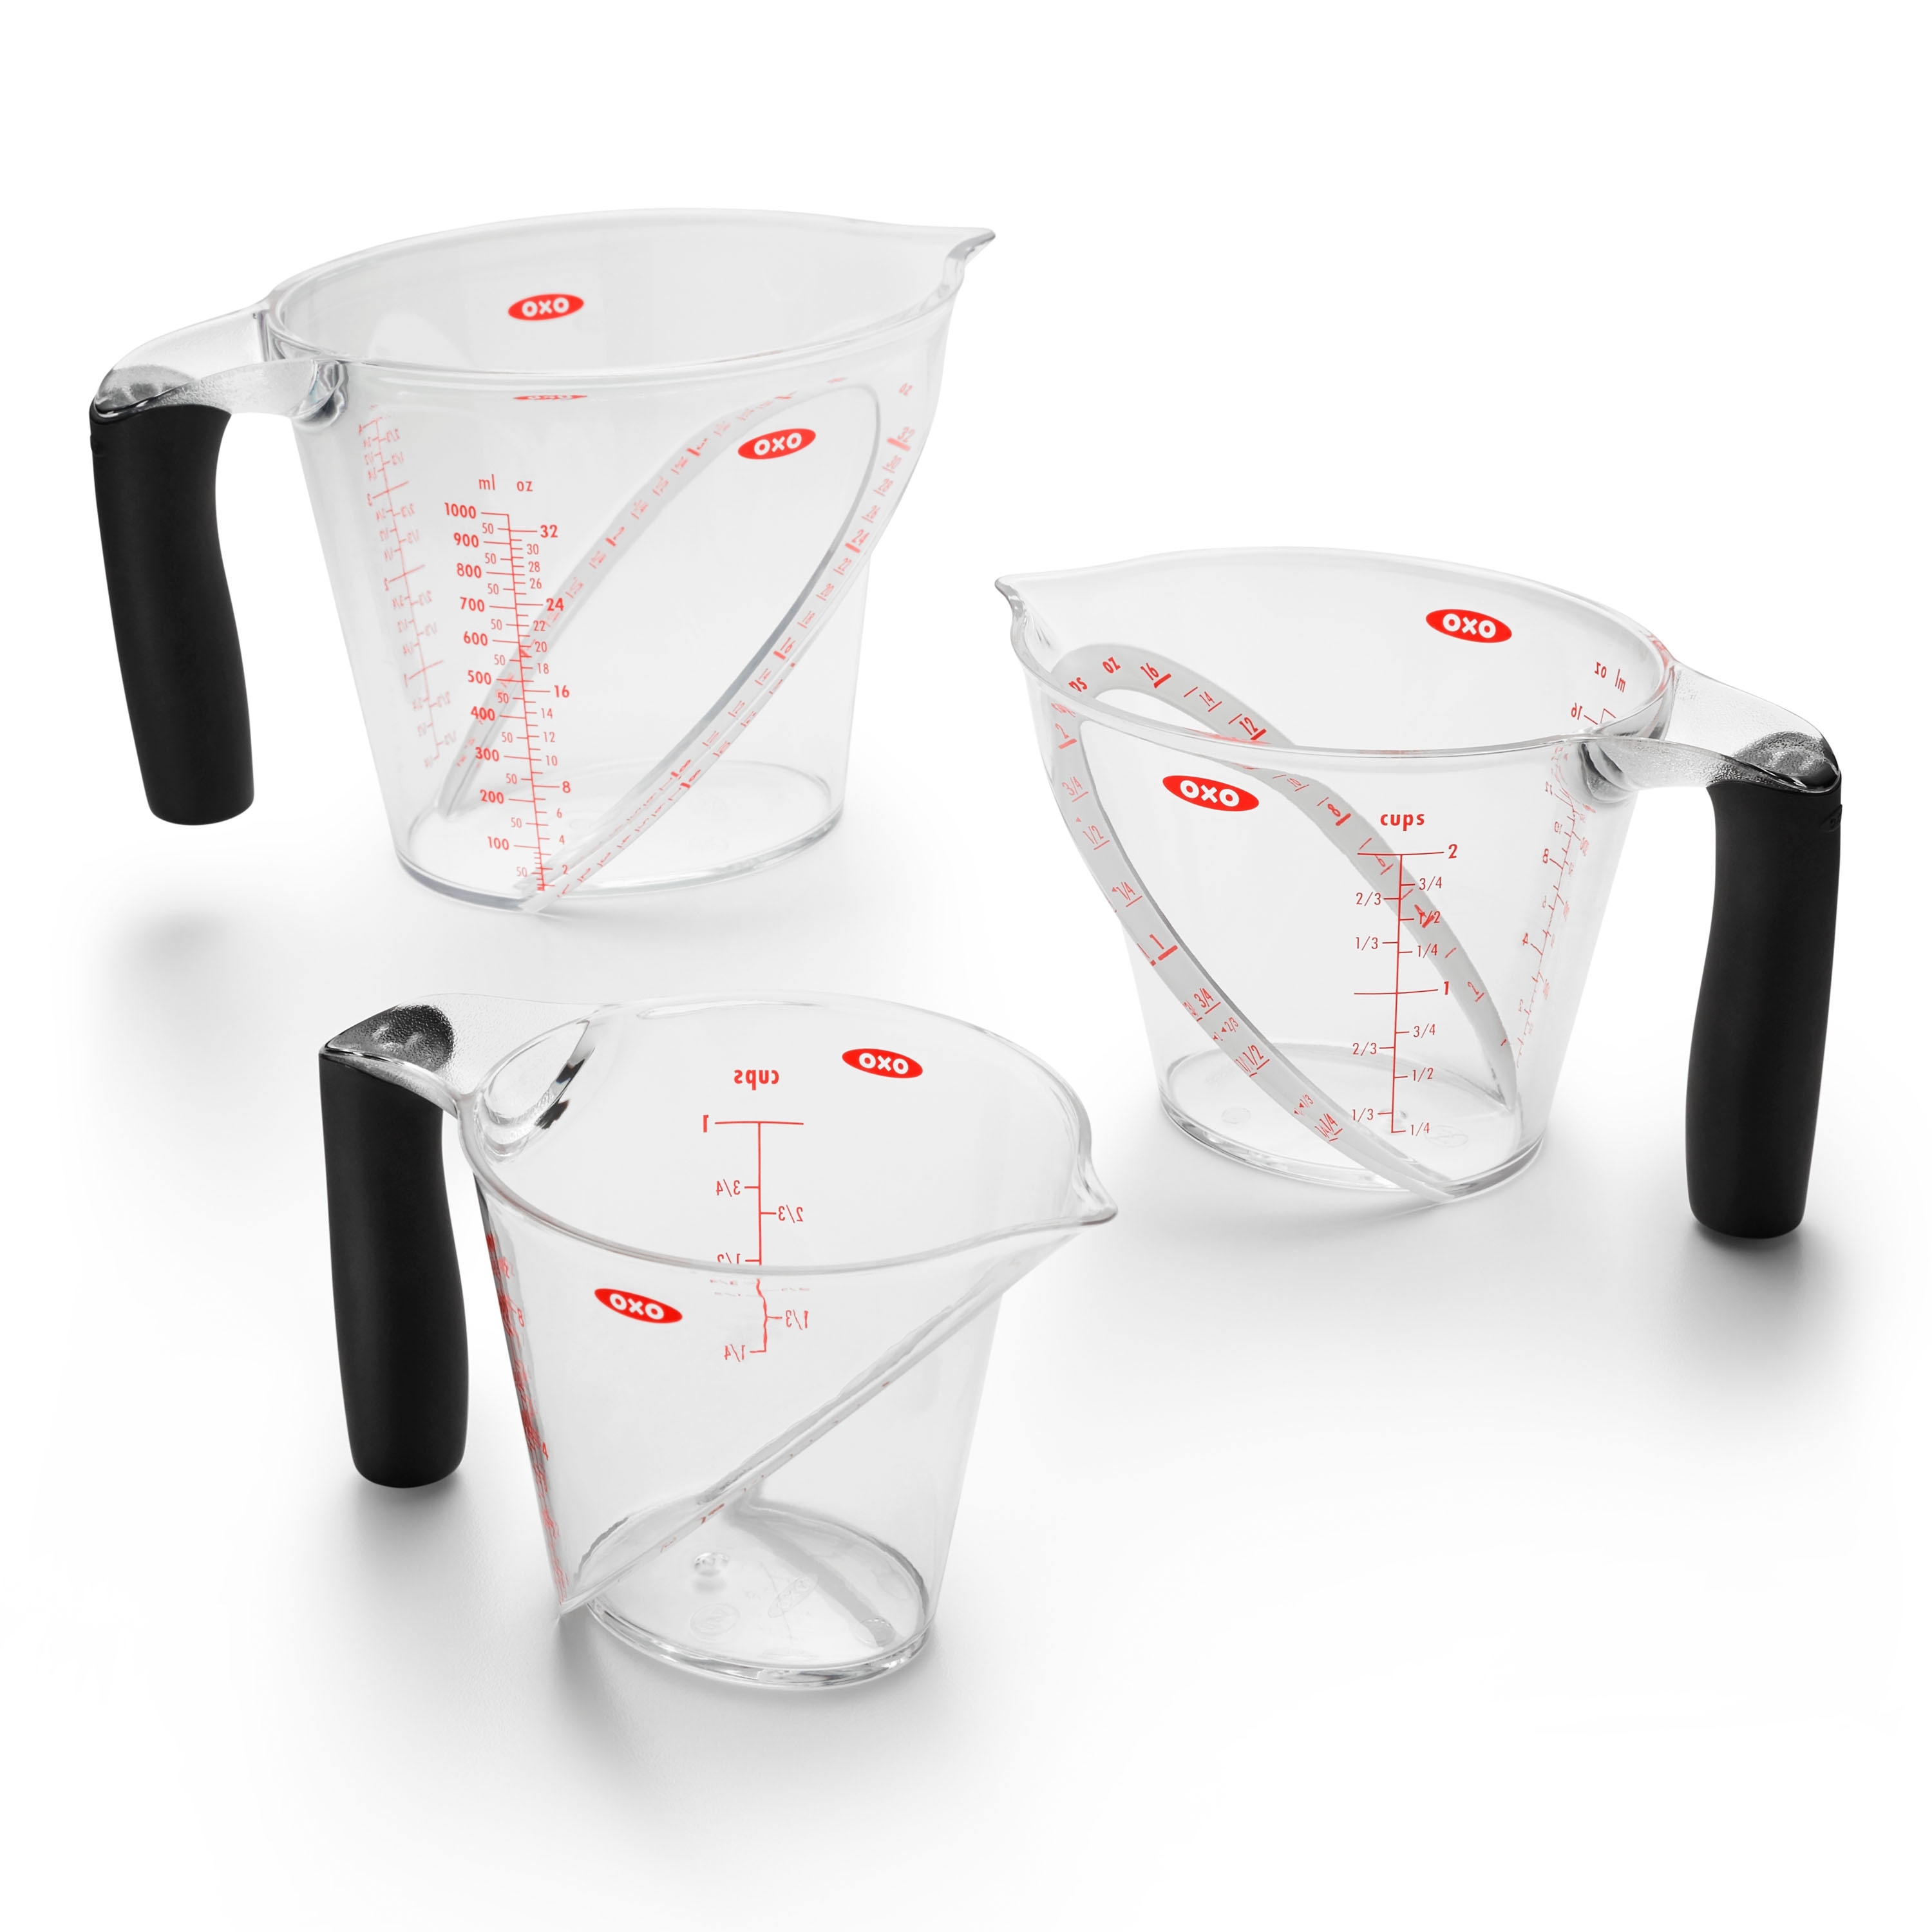 https://ak1.ostkcdn.com/images/products/is/images/direct/1b922d8ed13387ca2140d595d54122859d3f135d/OXO-3-Piece-Angled-Measuring-Cup-Set.jpg